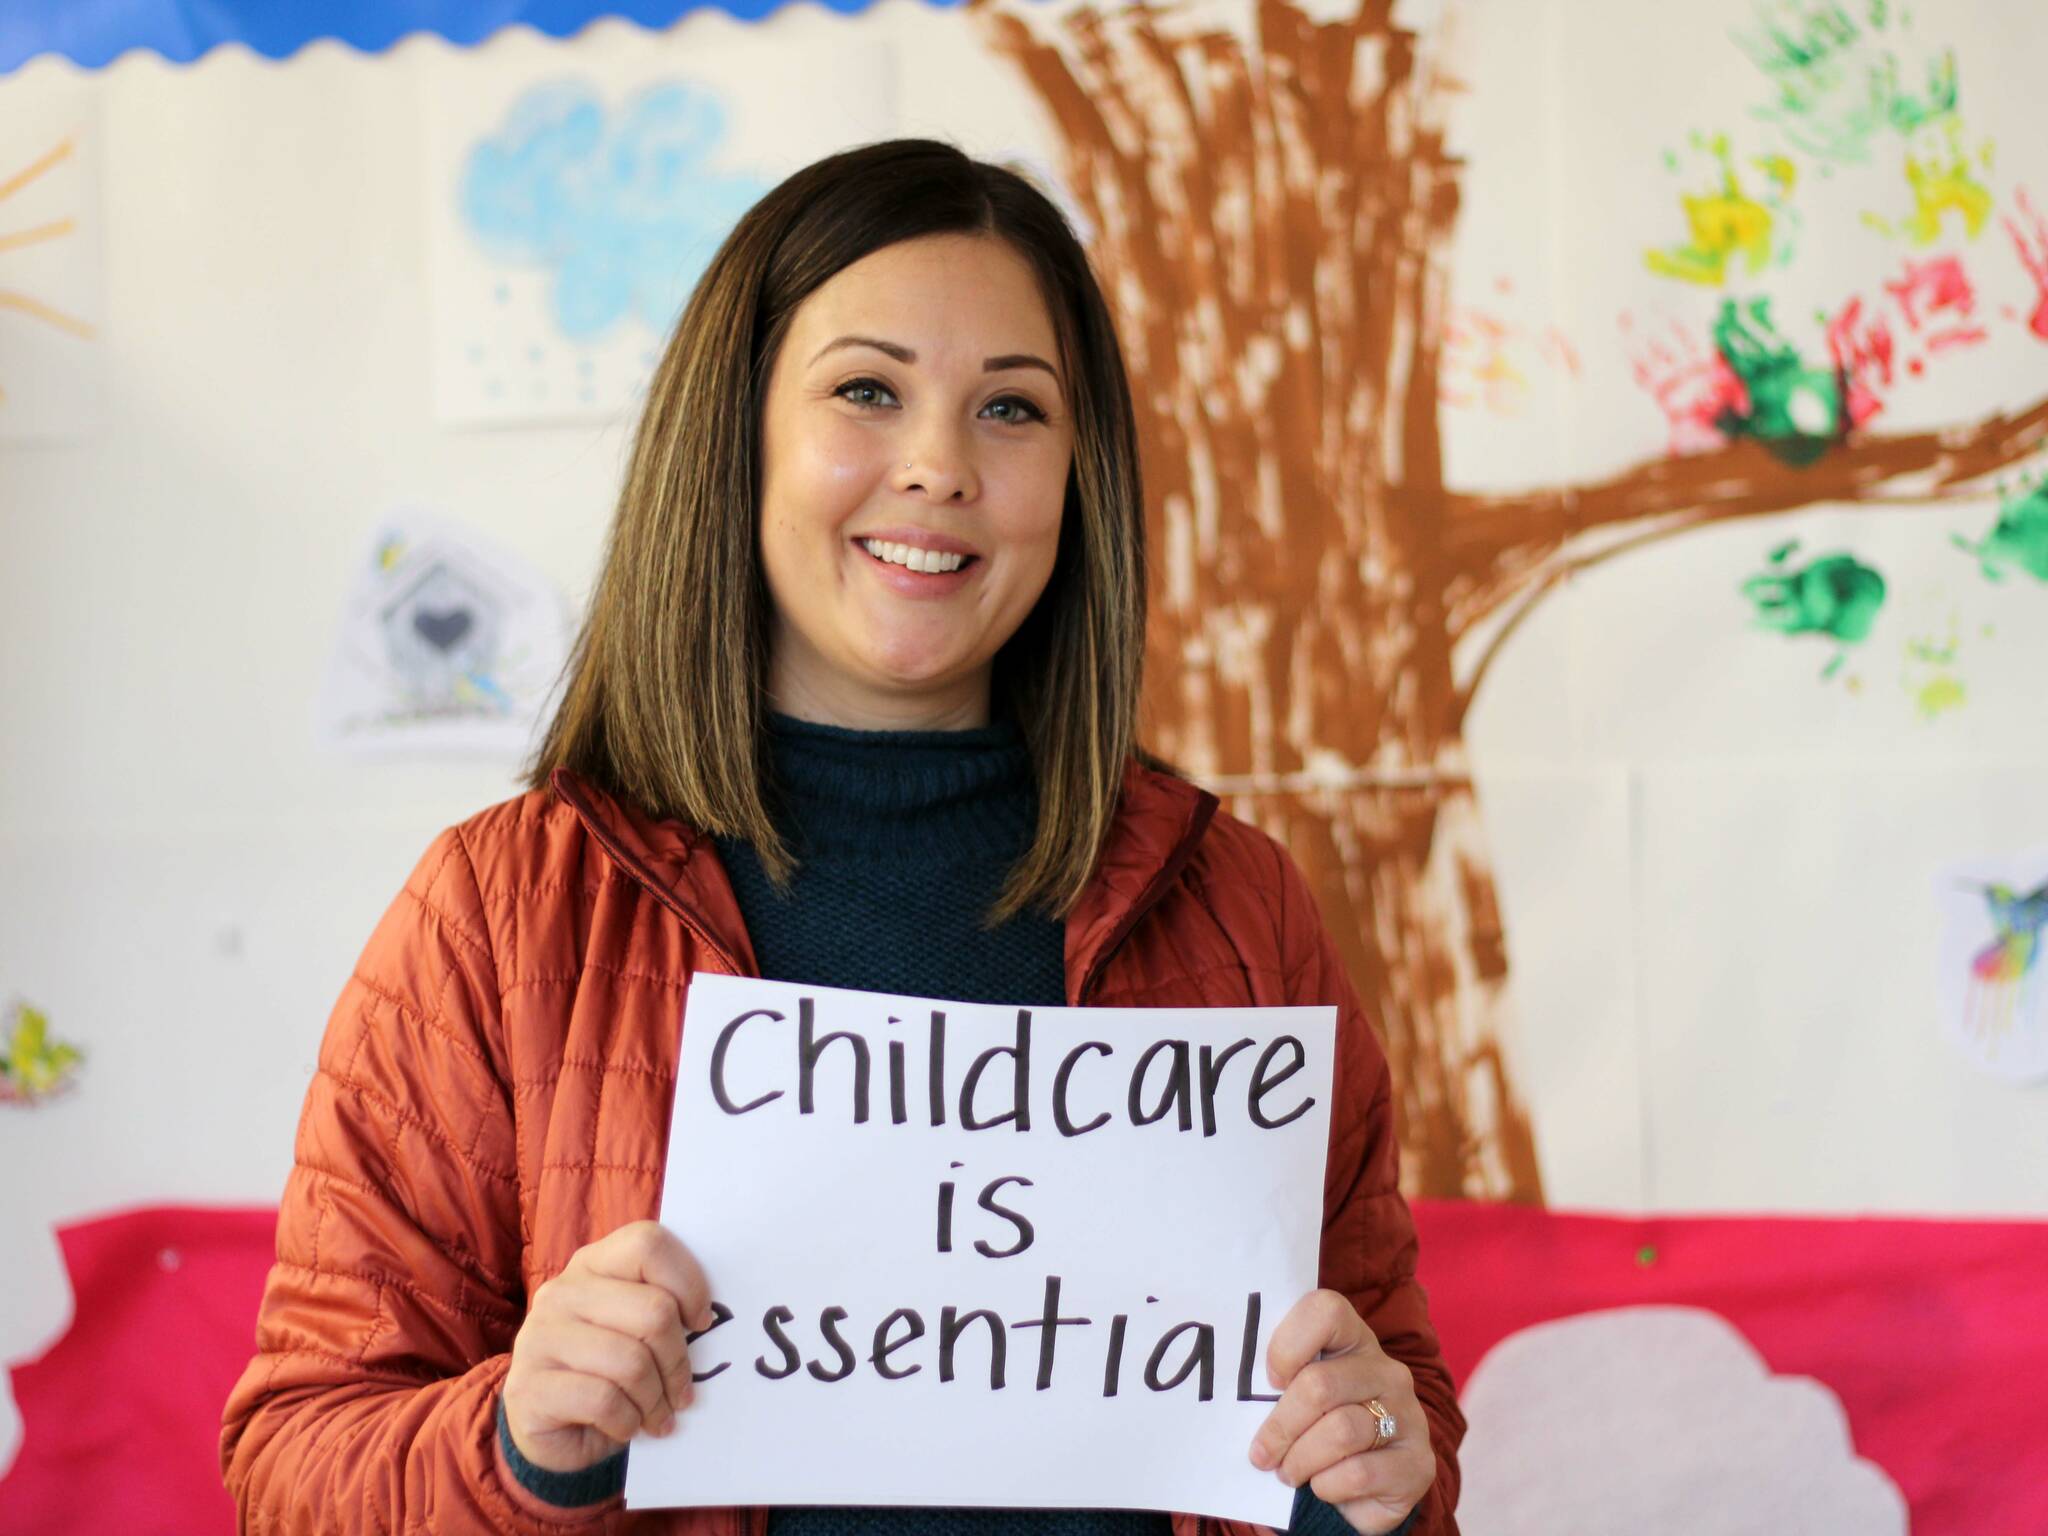 Kayla Svinicki, director and owner of Little Moon Child Care on Jan. 28. Svinicki said that providing childcare is essential but that the economics of the situation make the work difficult. She said she hopes the country starts to treat childcare as part of the nation's infrastructure. (Dana Zigmund/Juneau Empire)